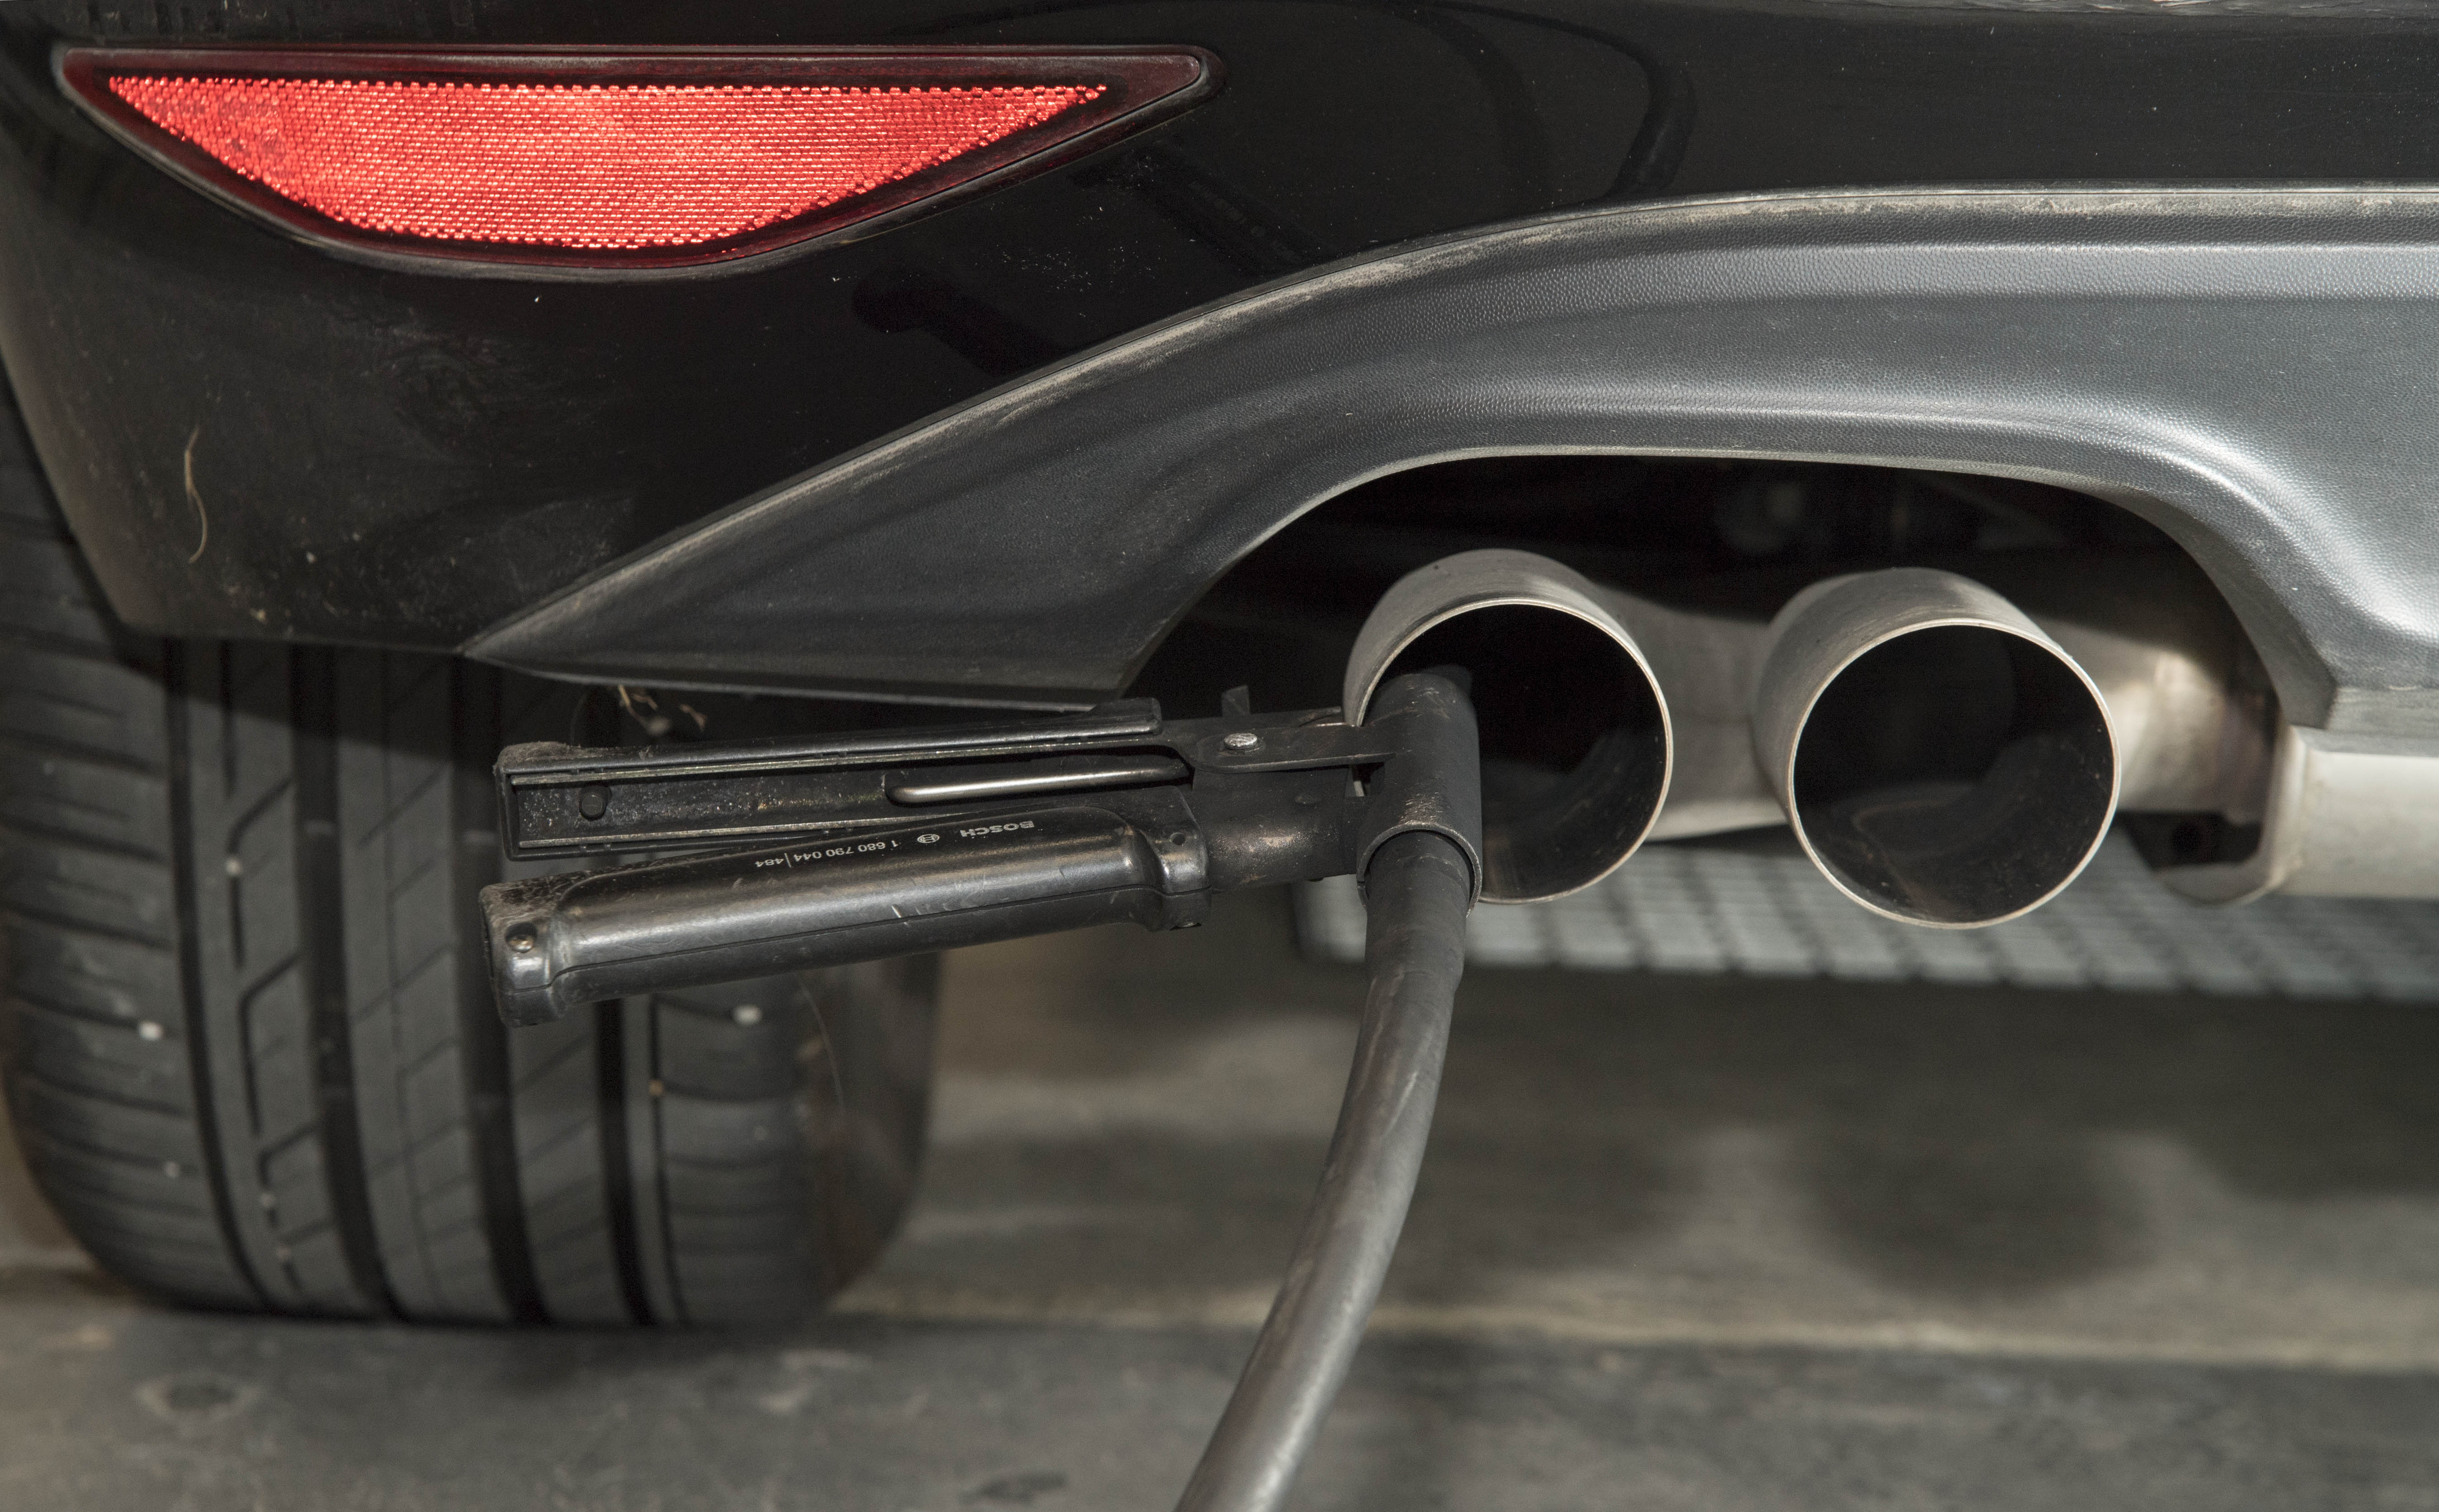 Higher tax on private use of diesel company car